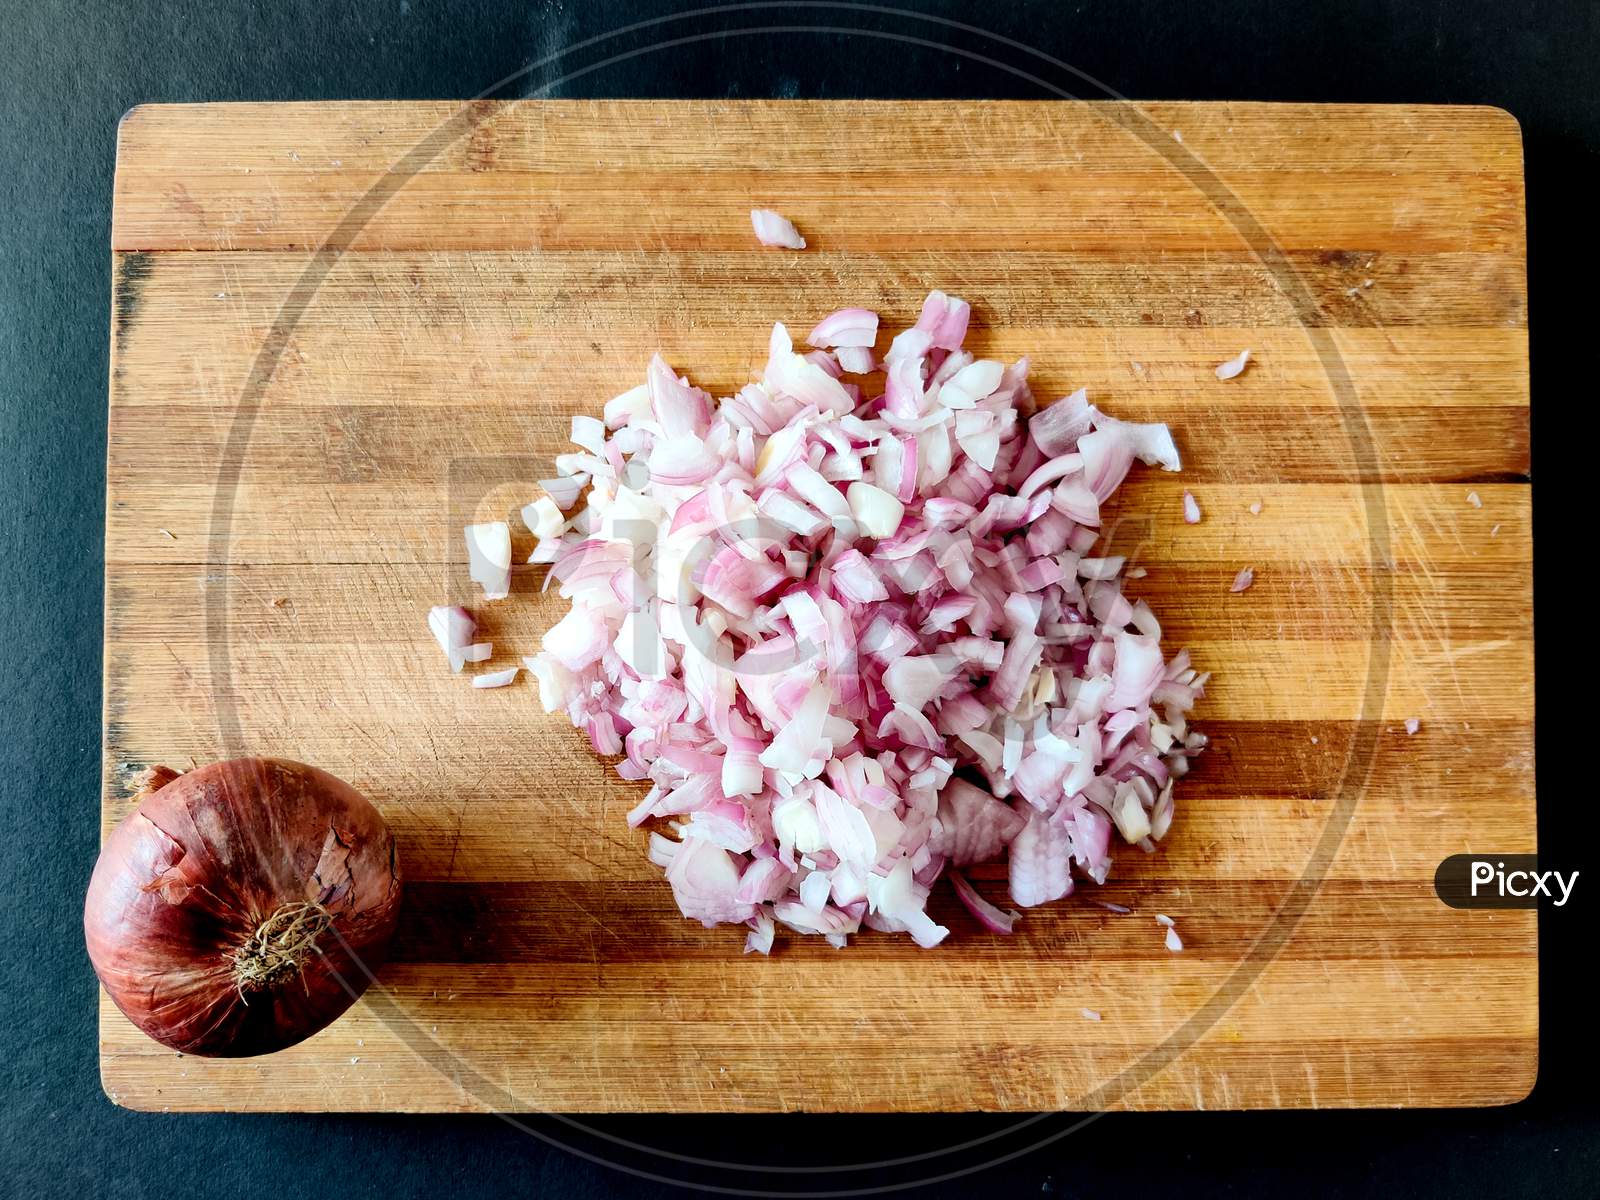 Raw Onion Chopped Into Small Cubes. Isolated On Wooden Board.